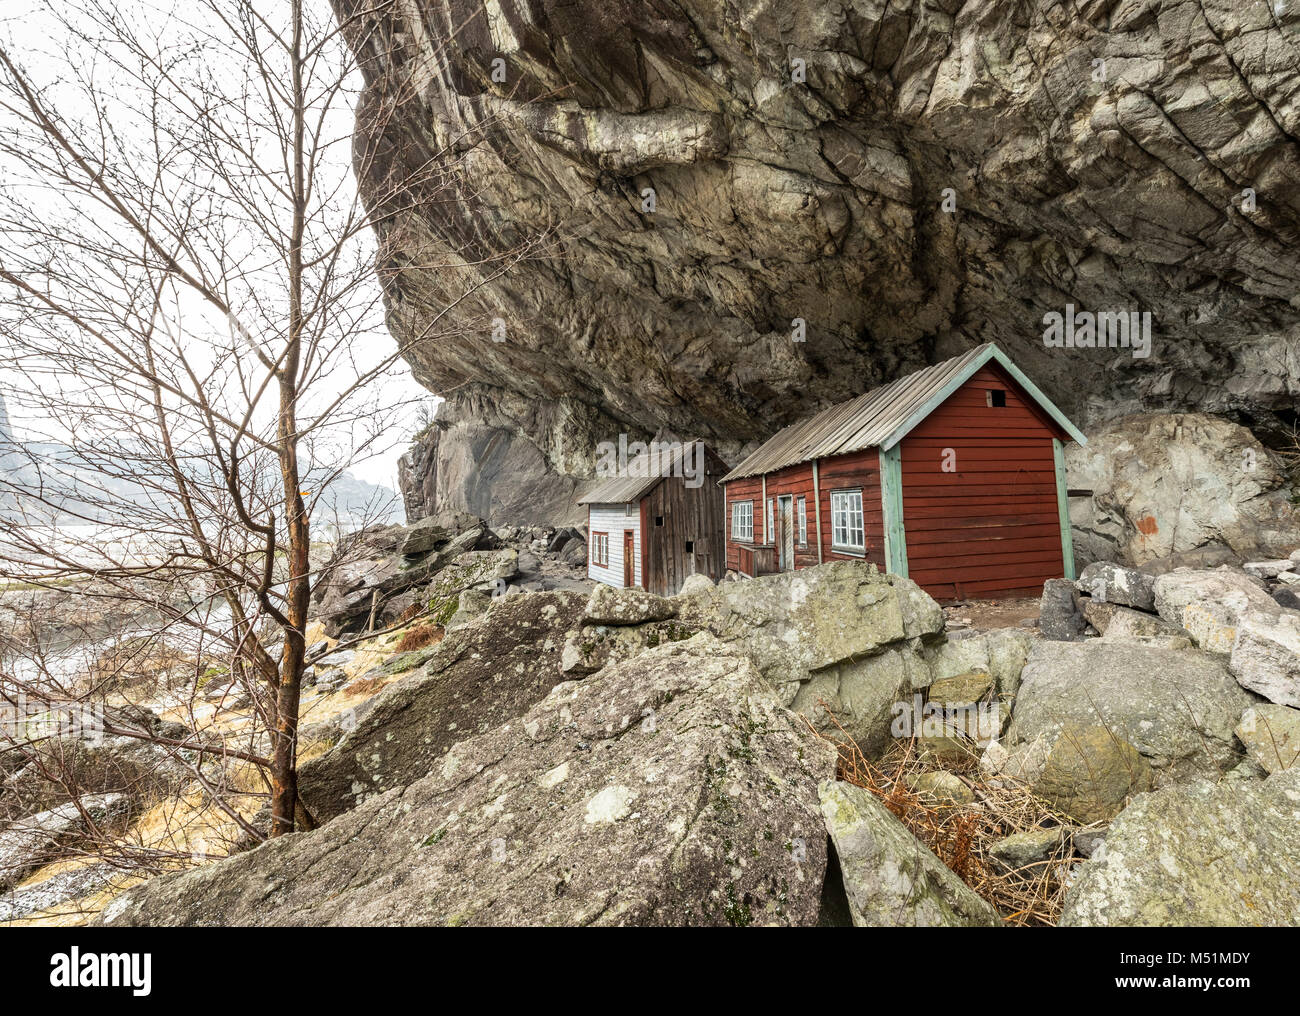 The Helleren houses in Jossingfjord along road 44 between Egersund and Flekkefjord, Sokndal municipality, Norway. January Stock Photo